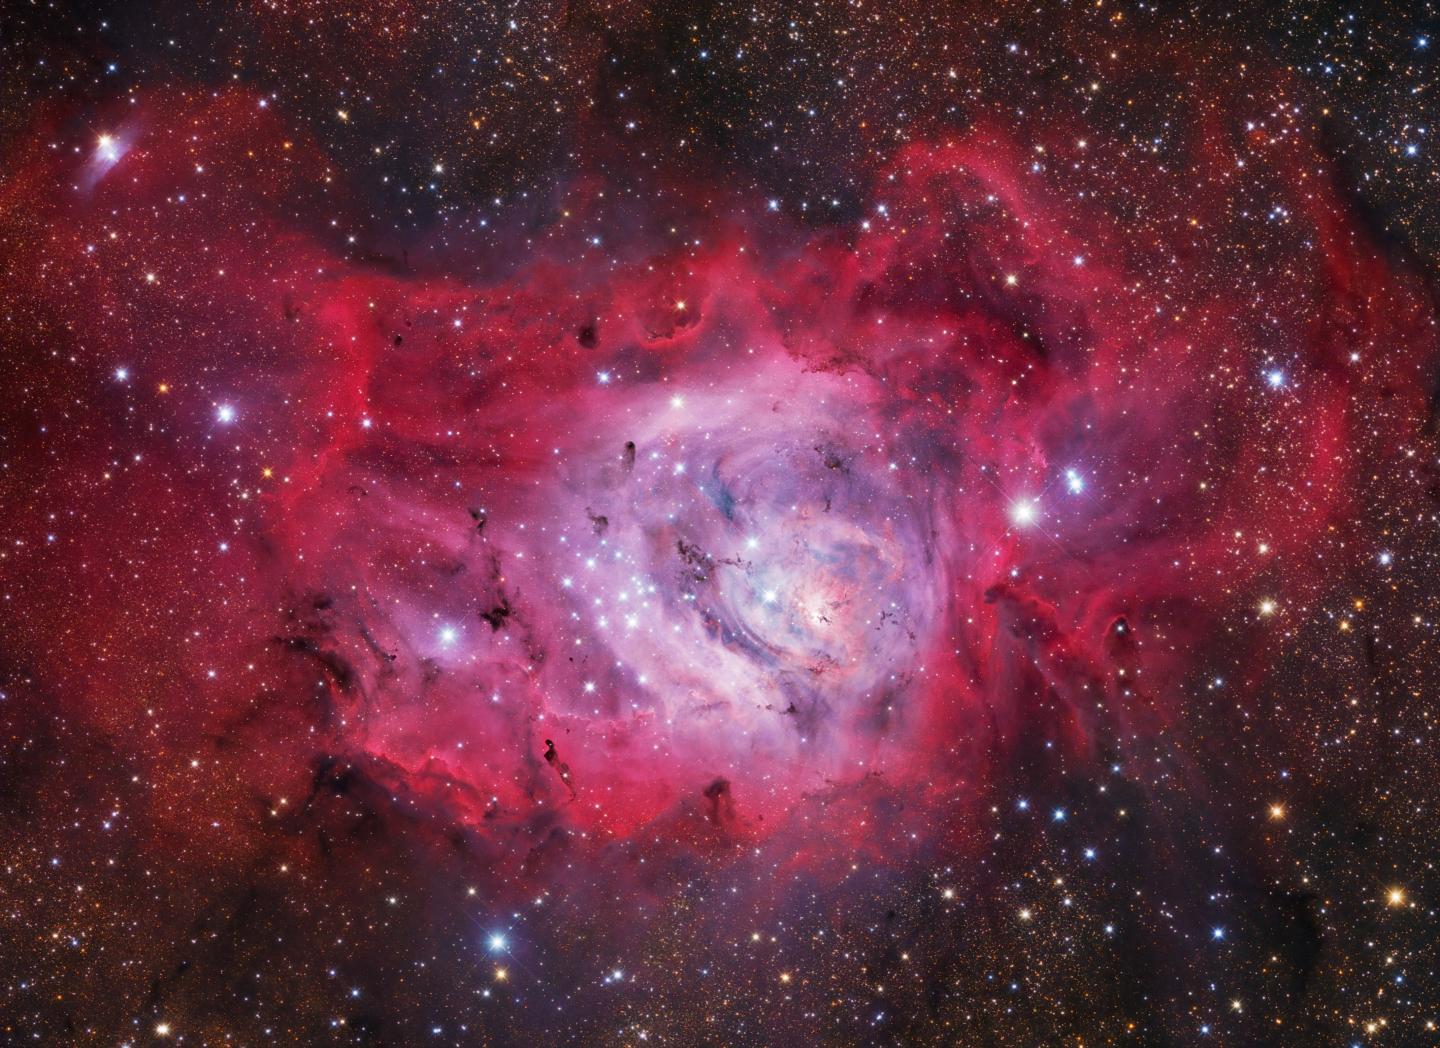 Image of the lagoon nebula, which has many bright blue stars in the centre within a rose pink cloud, surrounded by a darker pink cloud